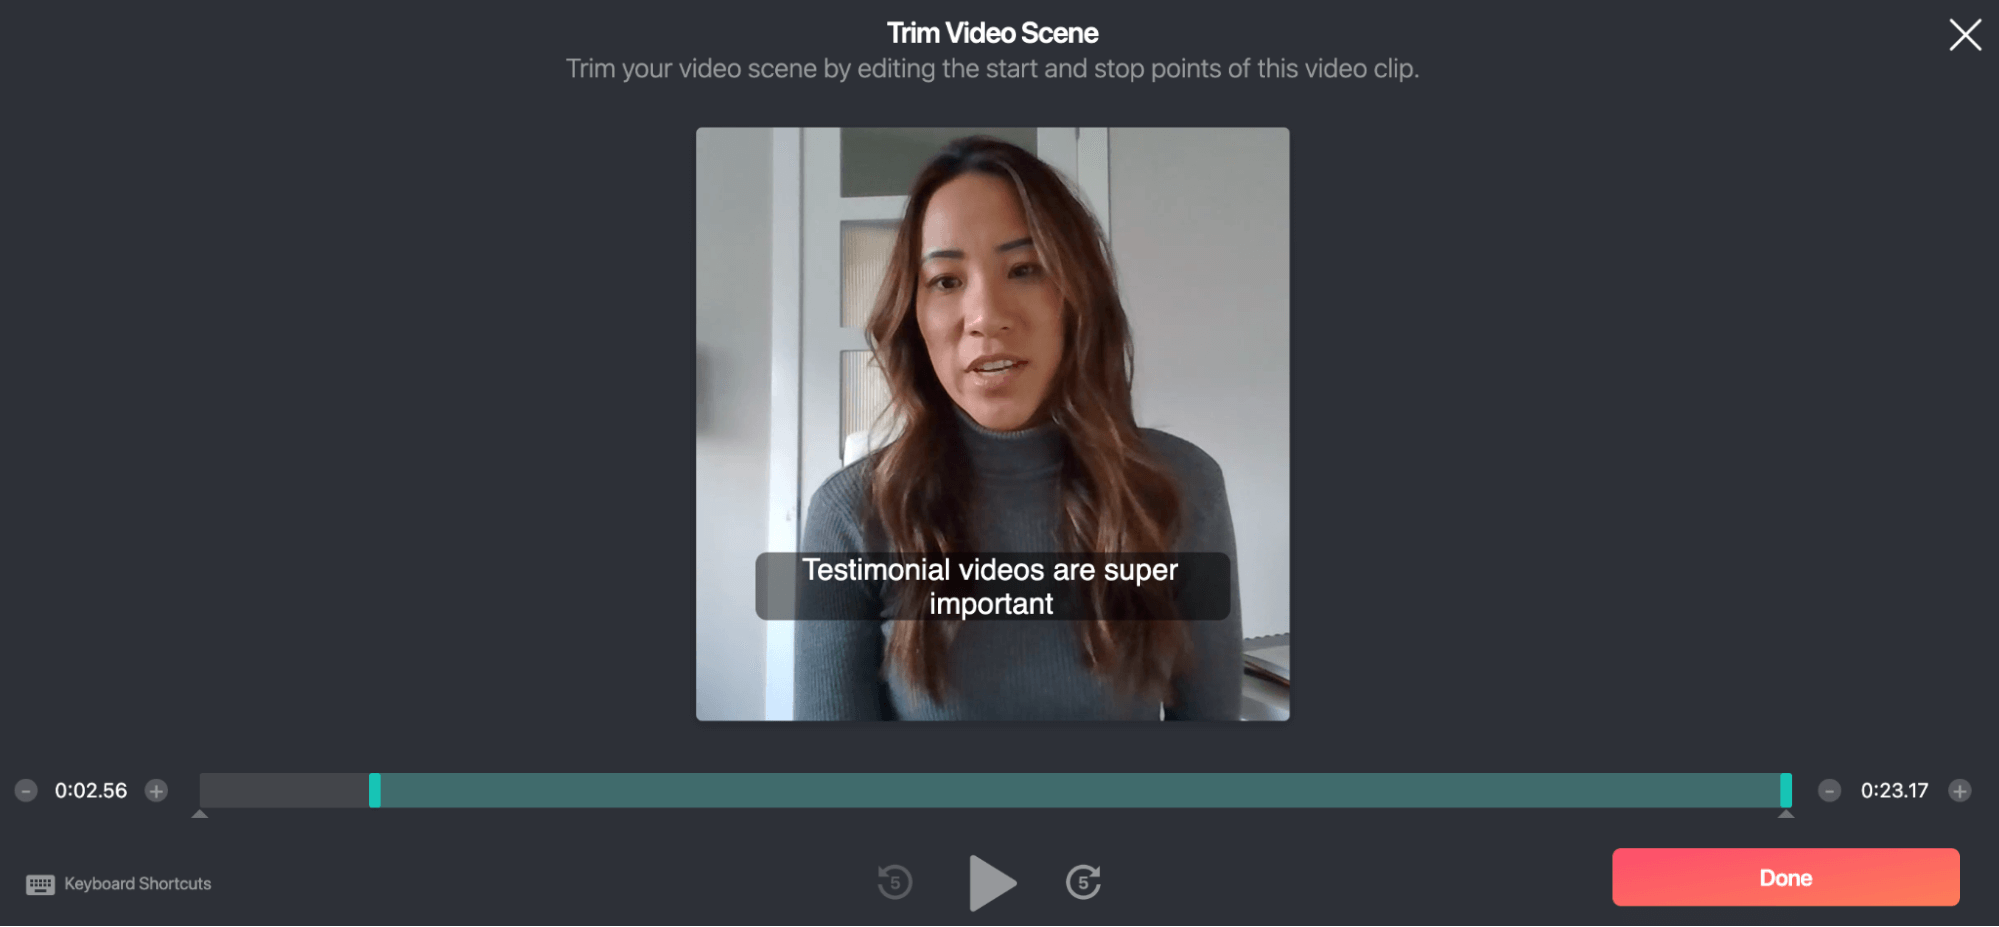 Trim Video Scene: Trim your video scene by editing the start and stop points